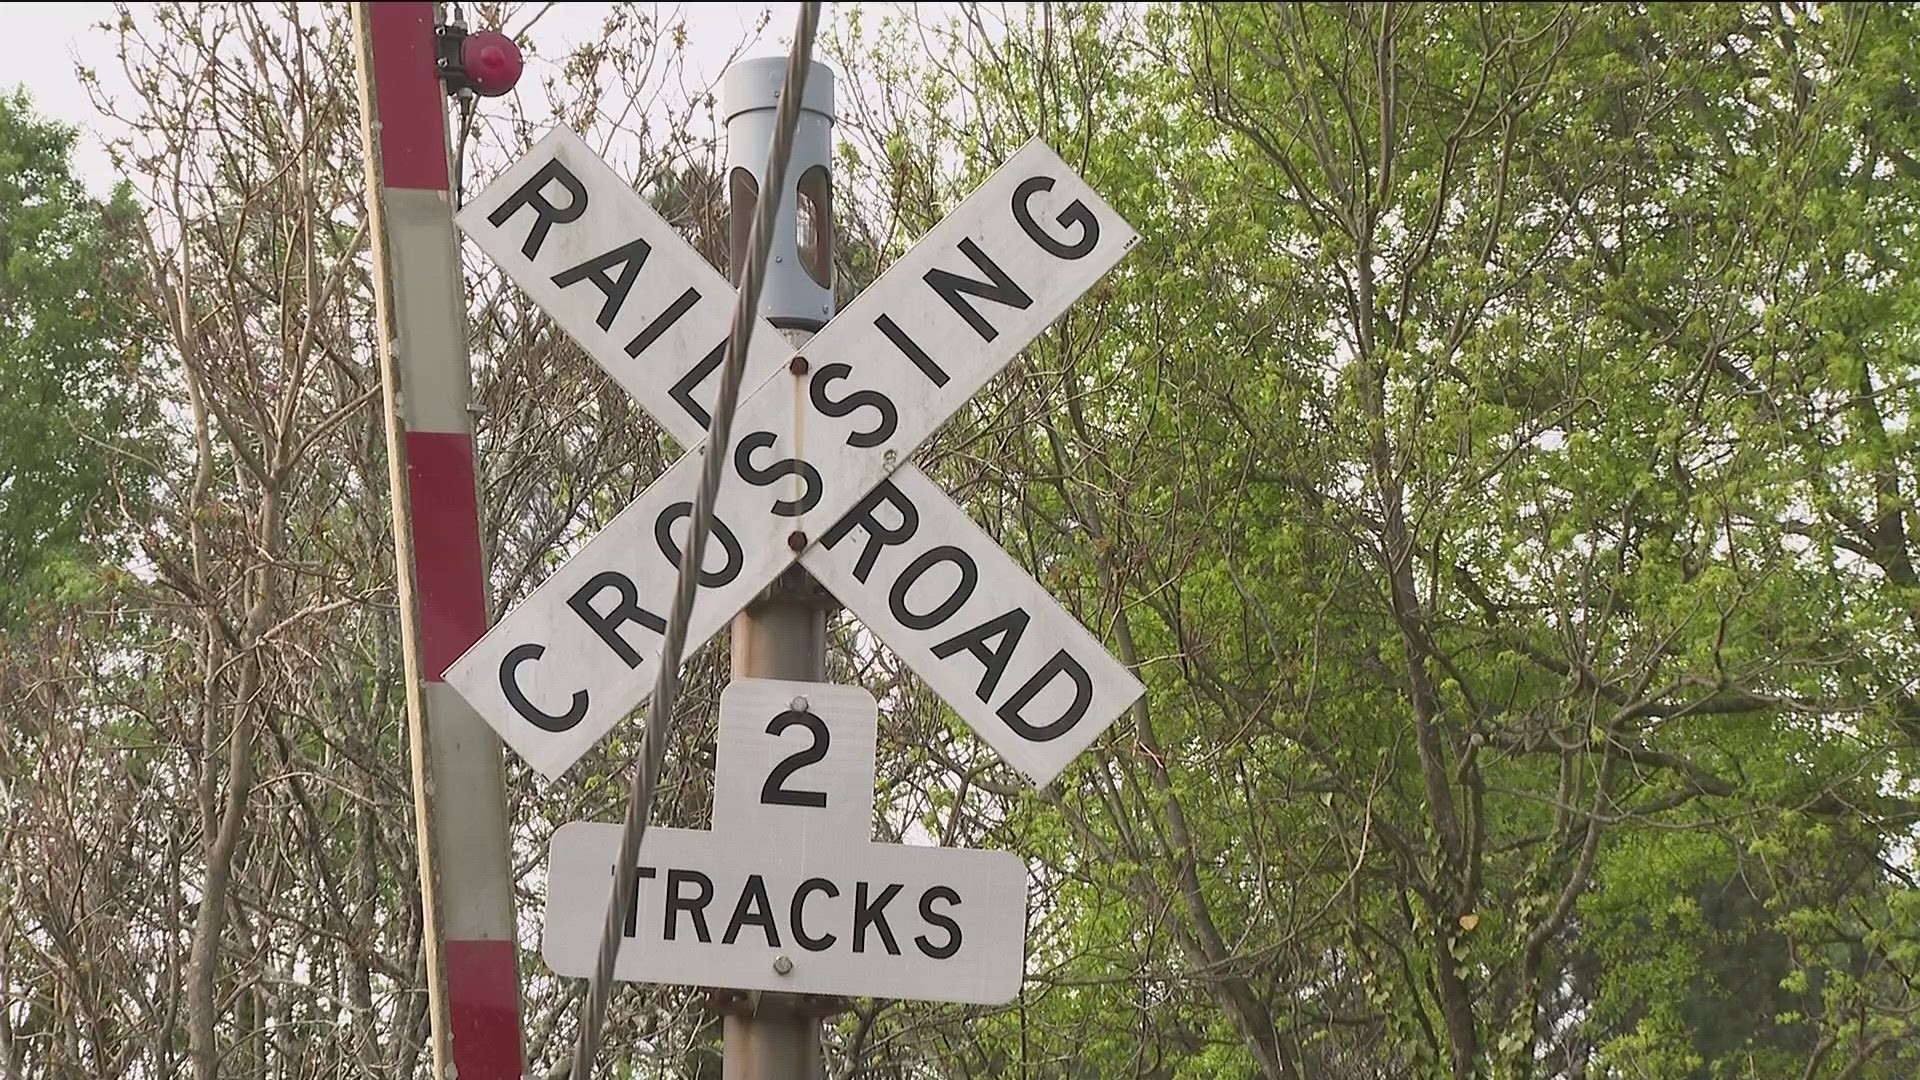 The residents are pleading with the rail company to keep its trains from blocking crossing for days.